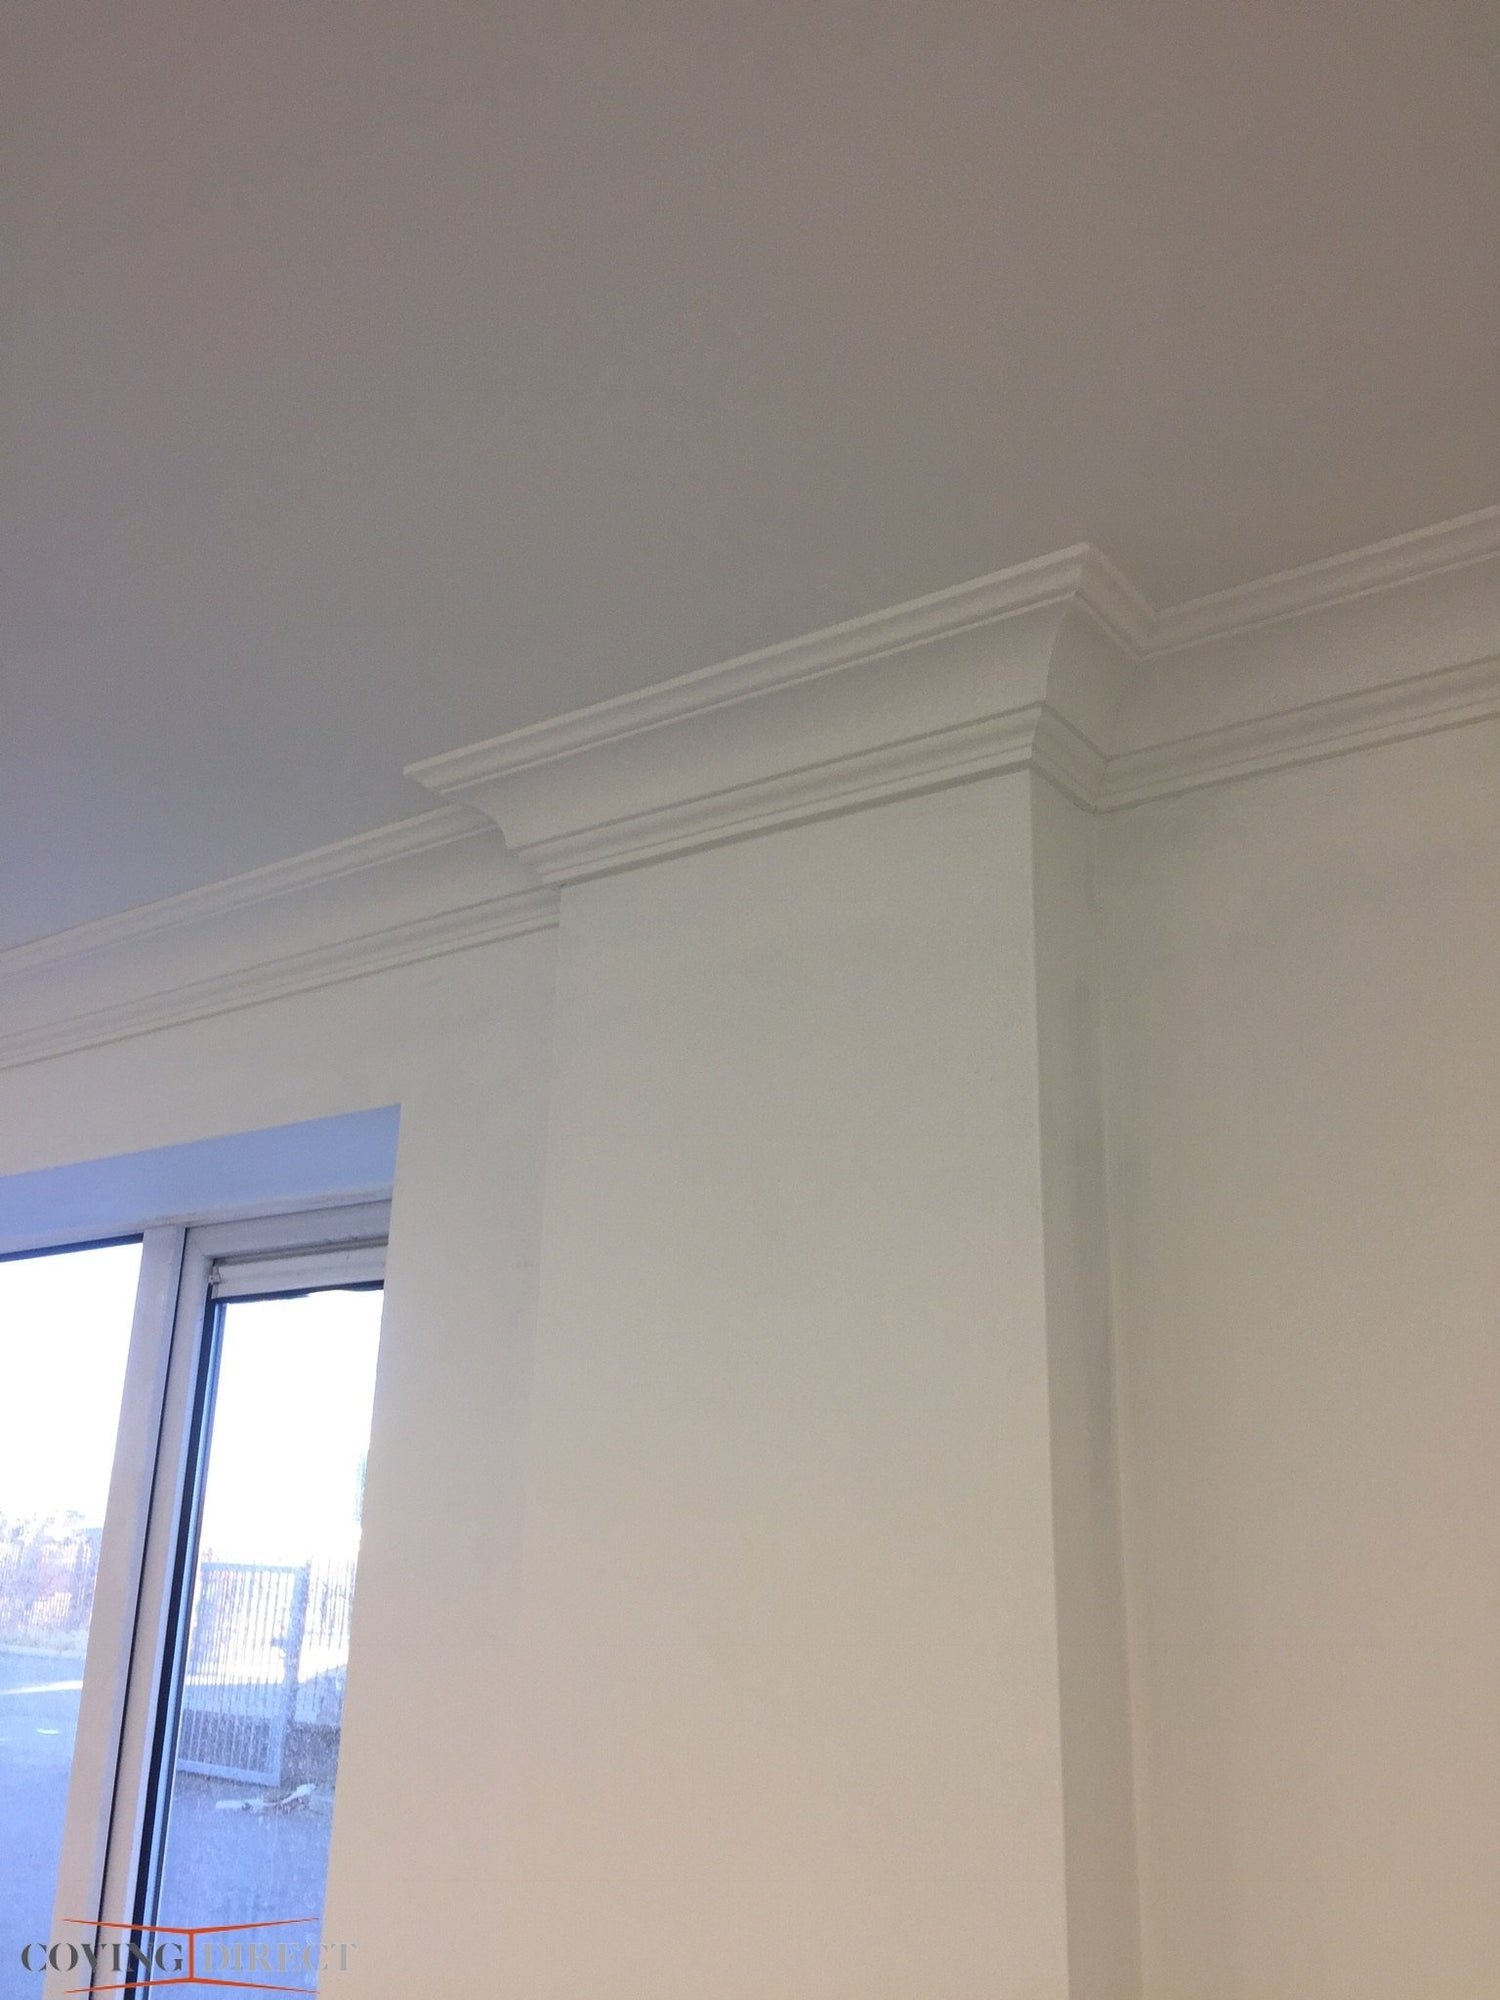 Crown - Classic Coving installed in a room with a light colour scheme